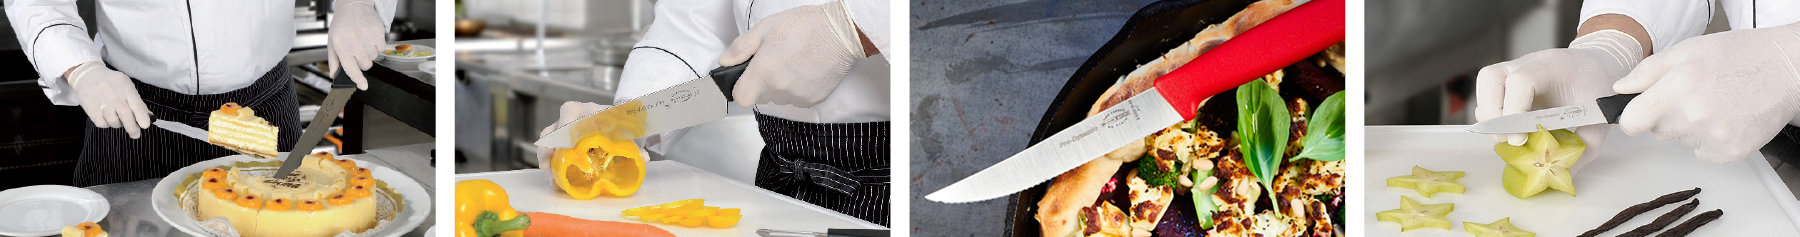 FDick ProDynamic series knives displayed in a banner collage image